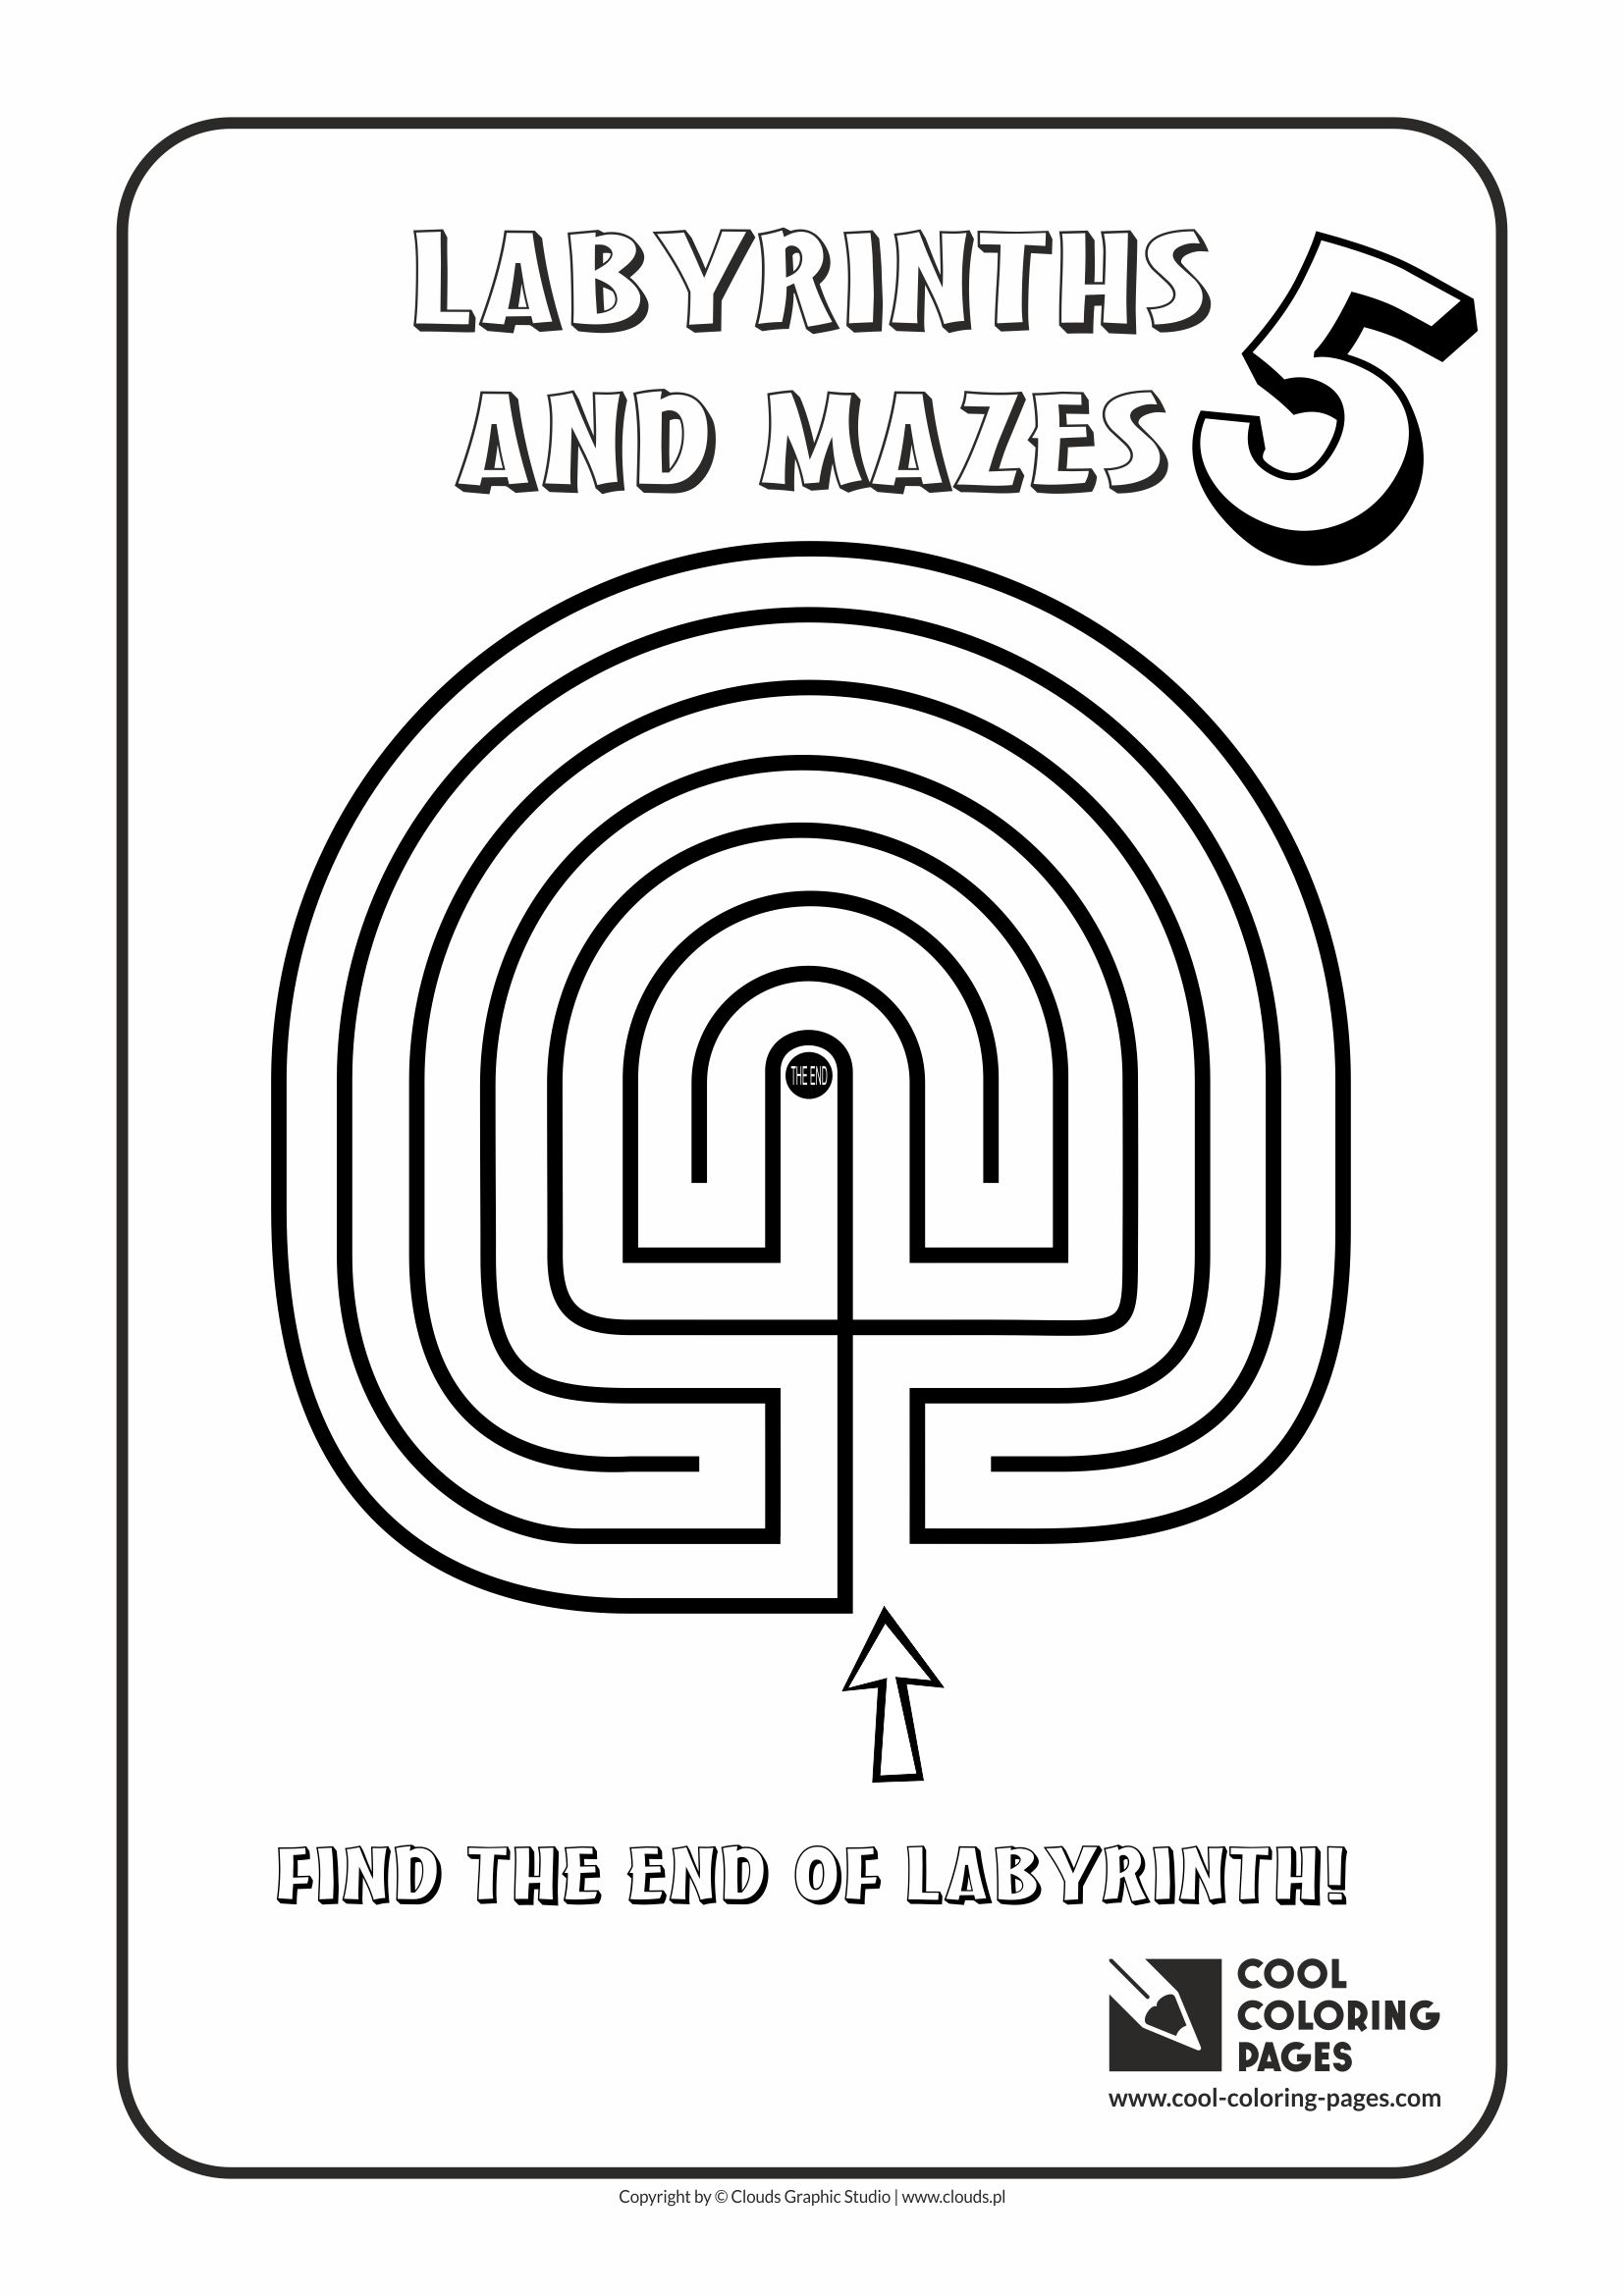 Cool Coloring Pages - Labyrinths and mazes / Maze no 5